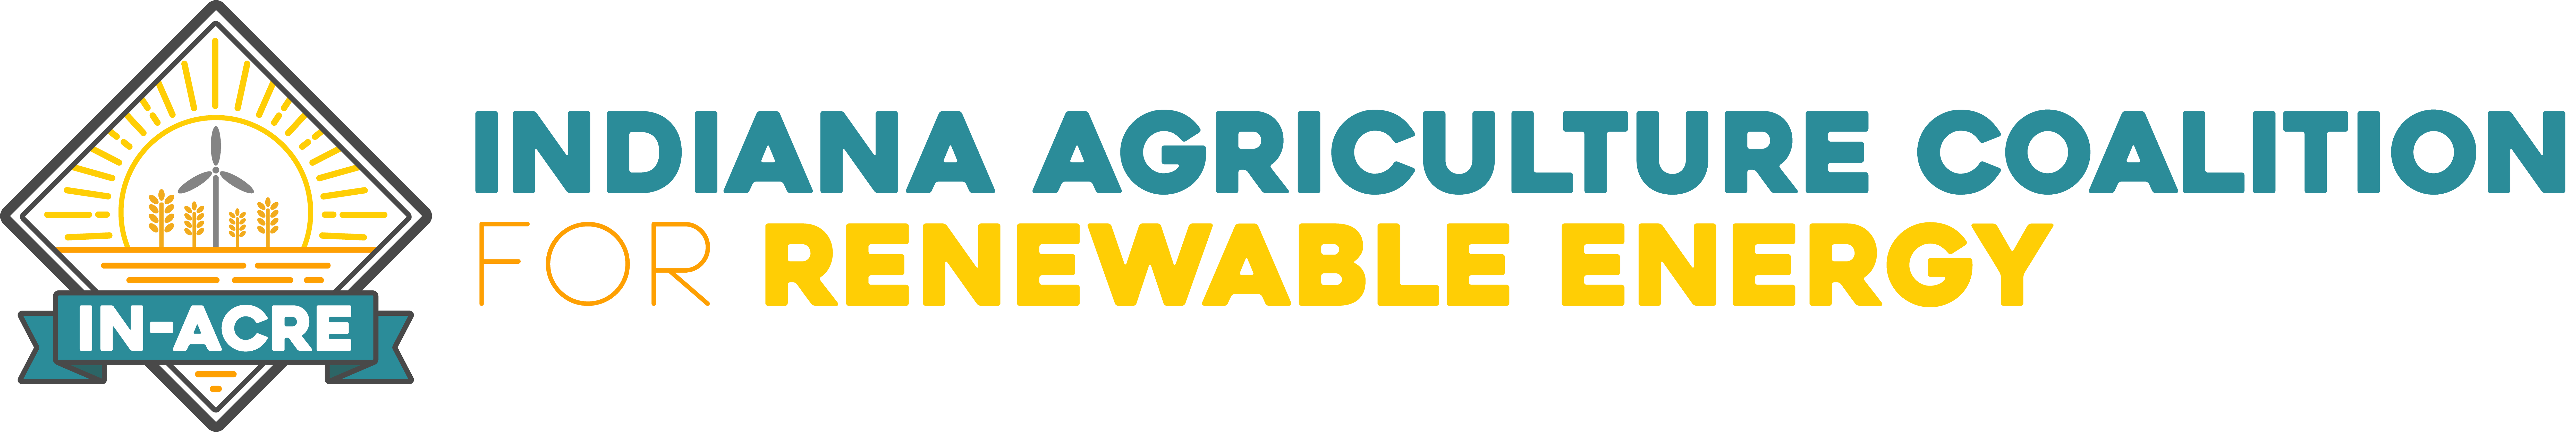 Indiana Agriculture Coalition for Renewable Energy